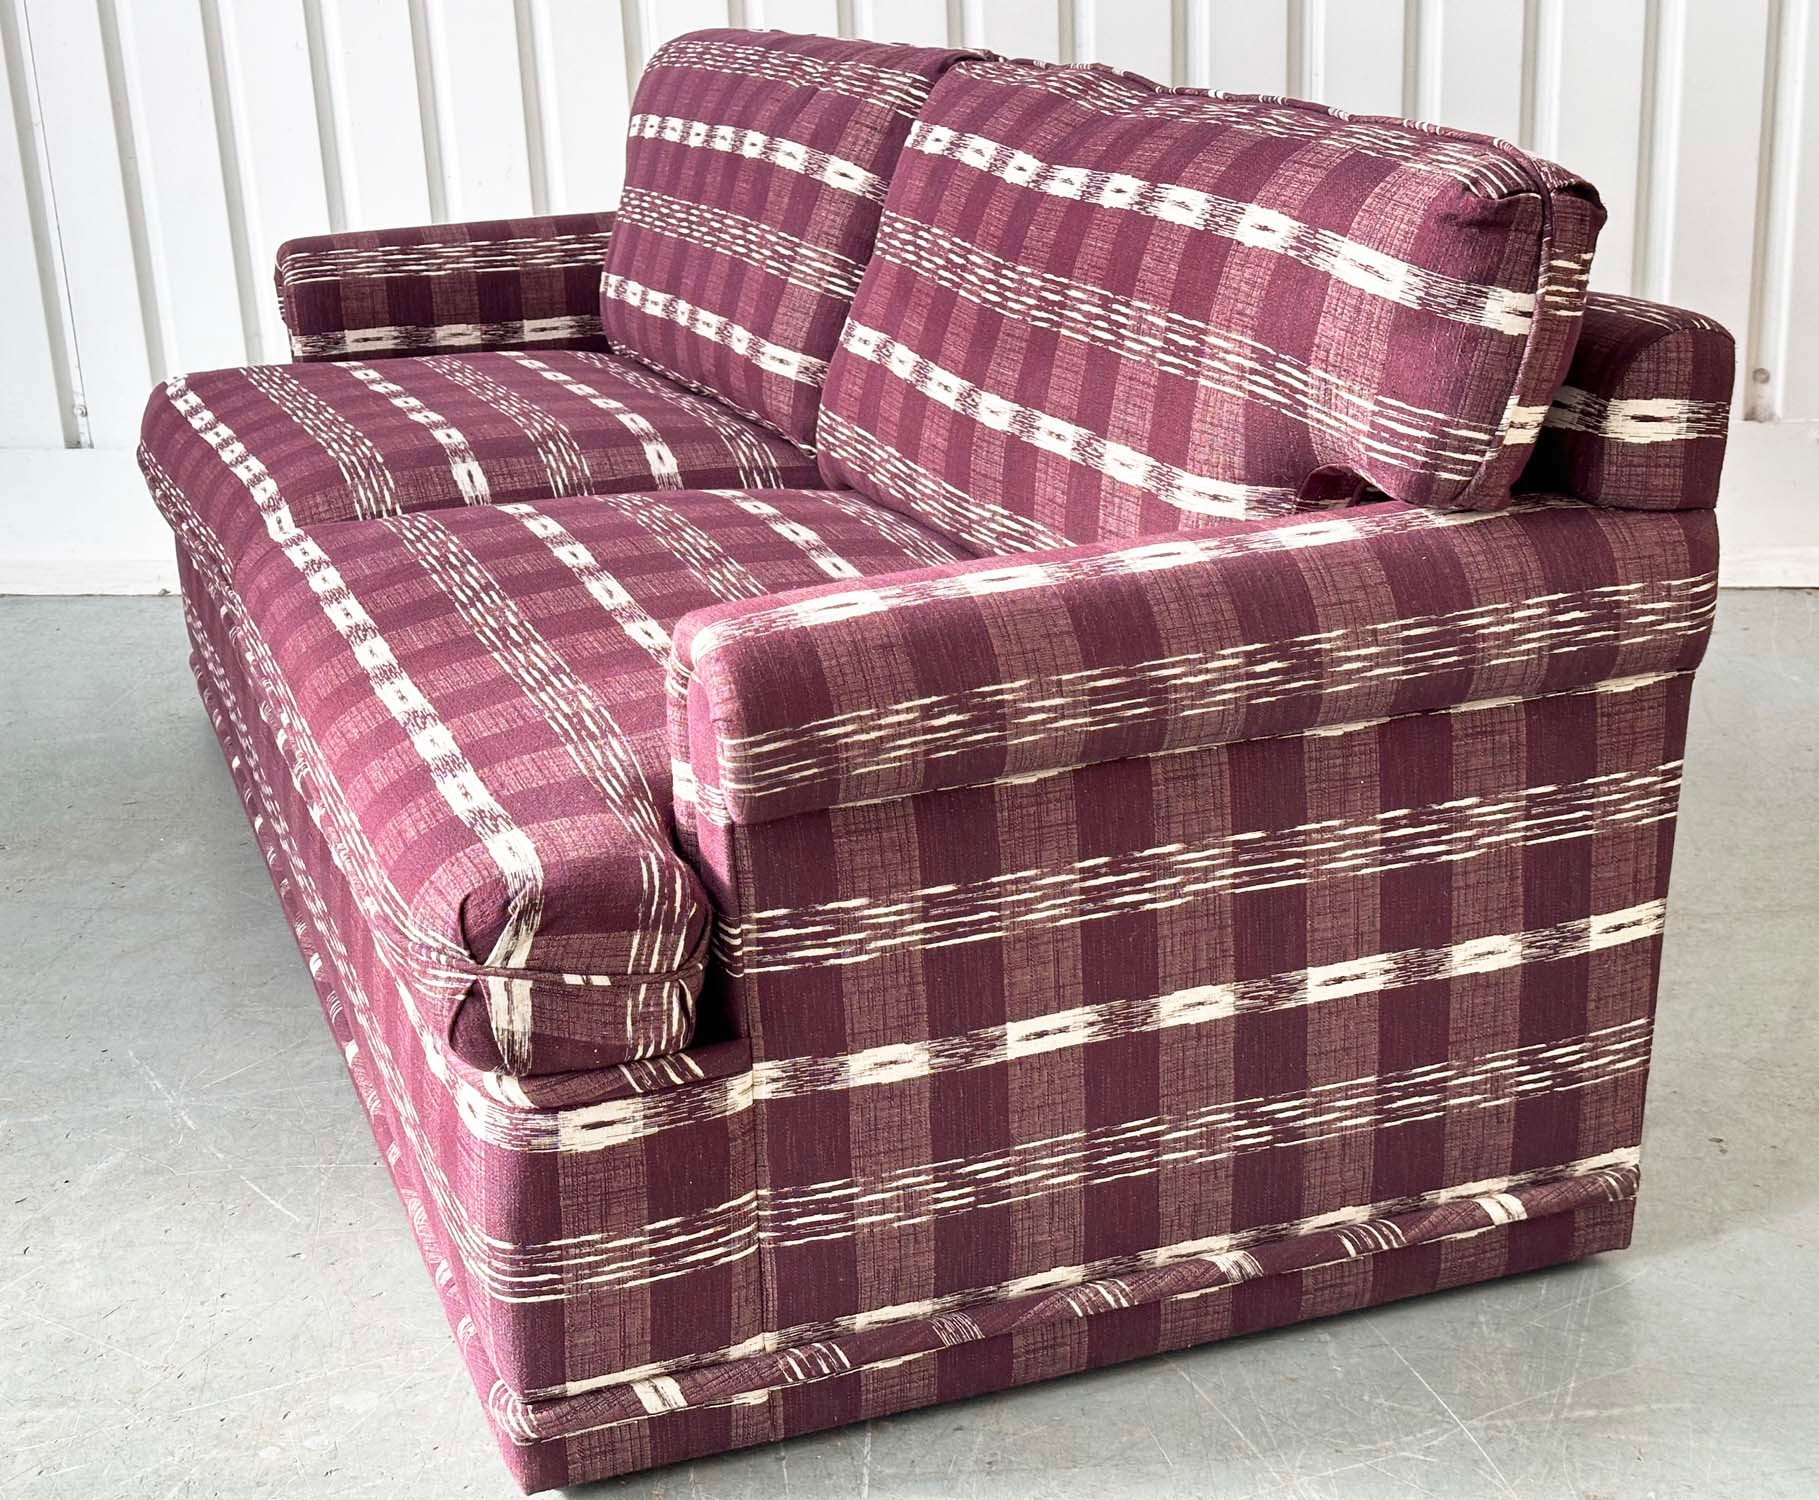 SOFA, Swedish check purple/white upholstery with scroll arms, 203cm W. - Image 14 of 18